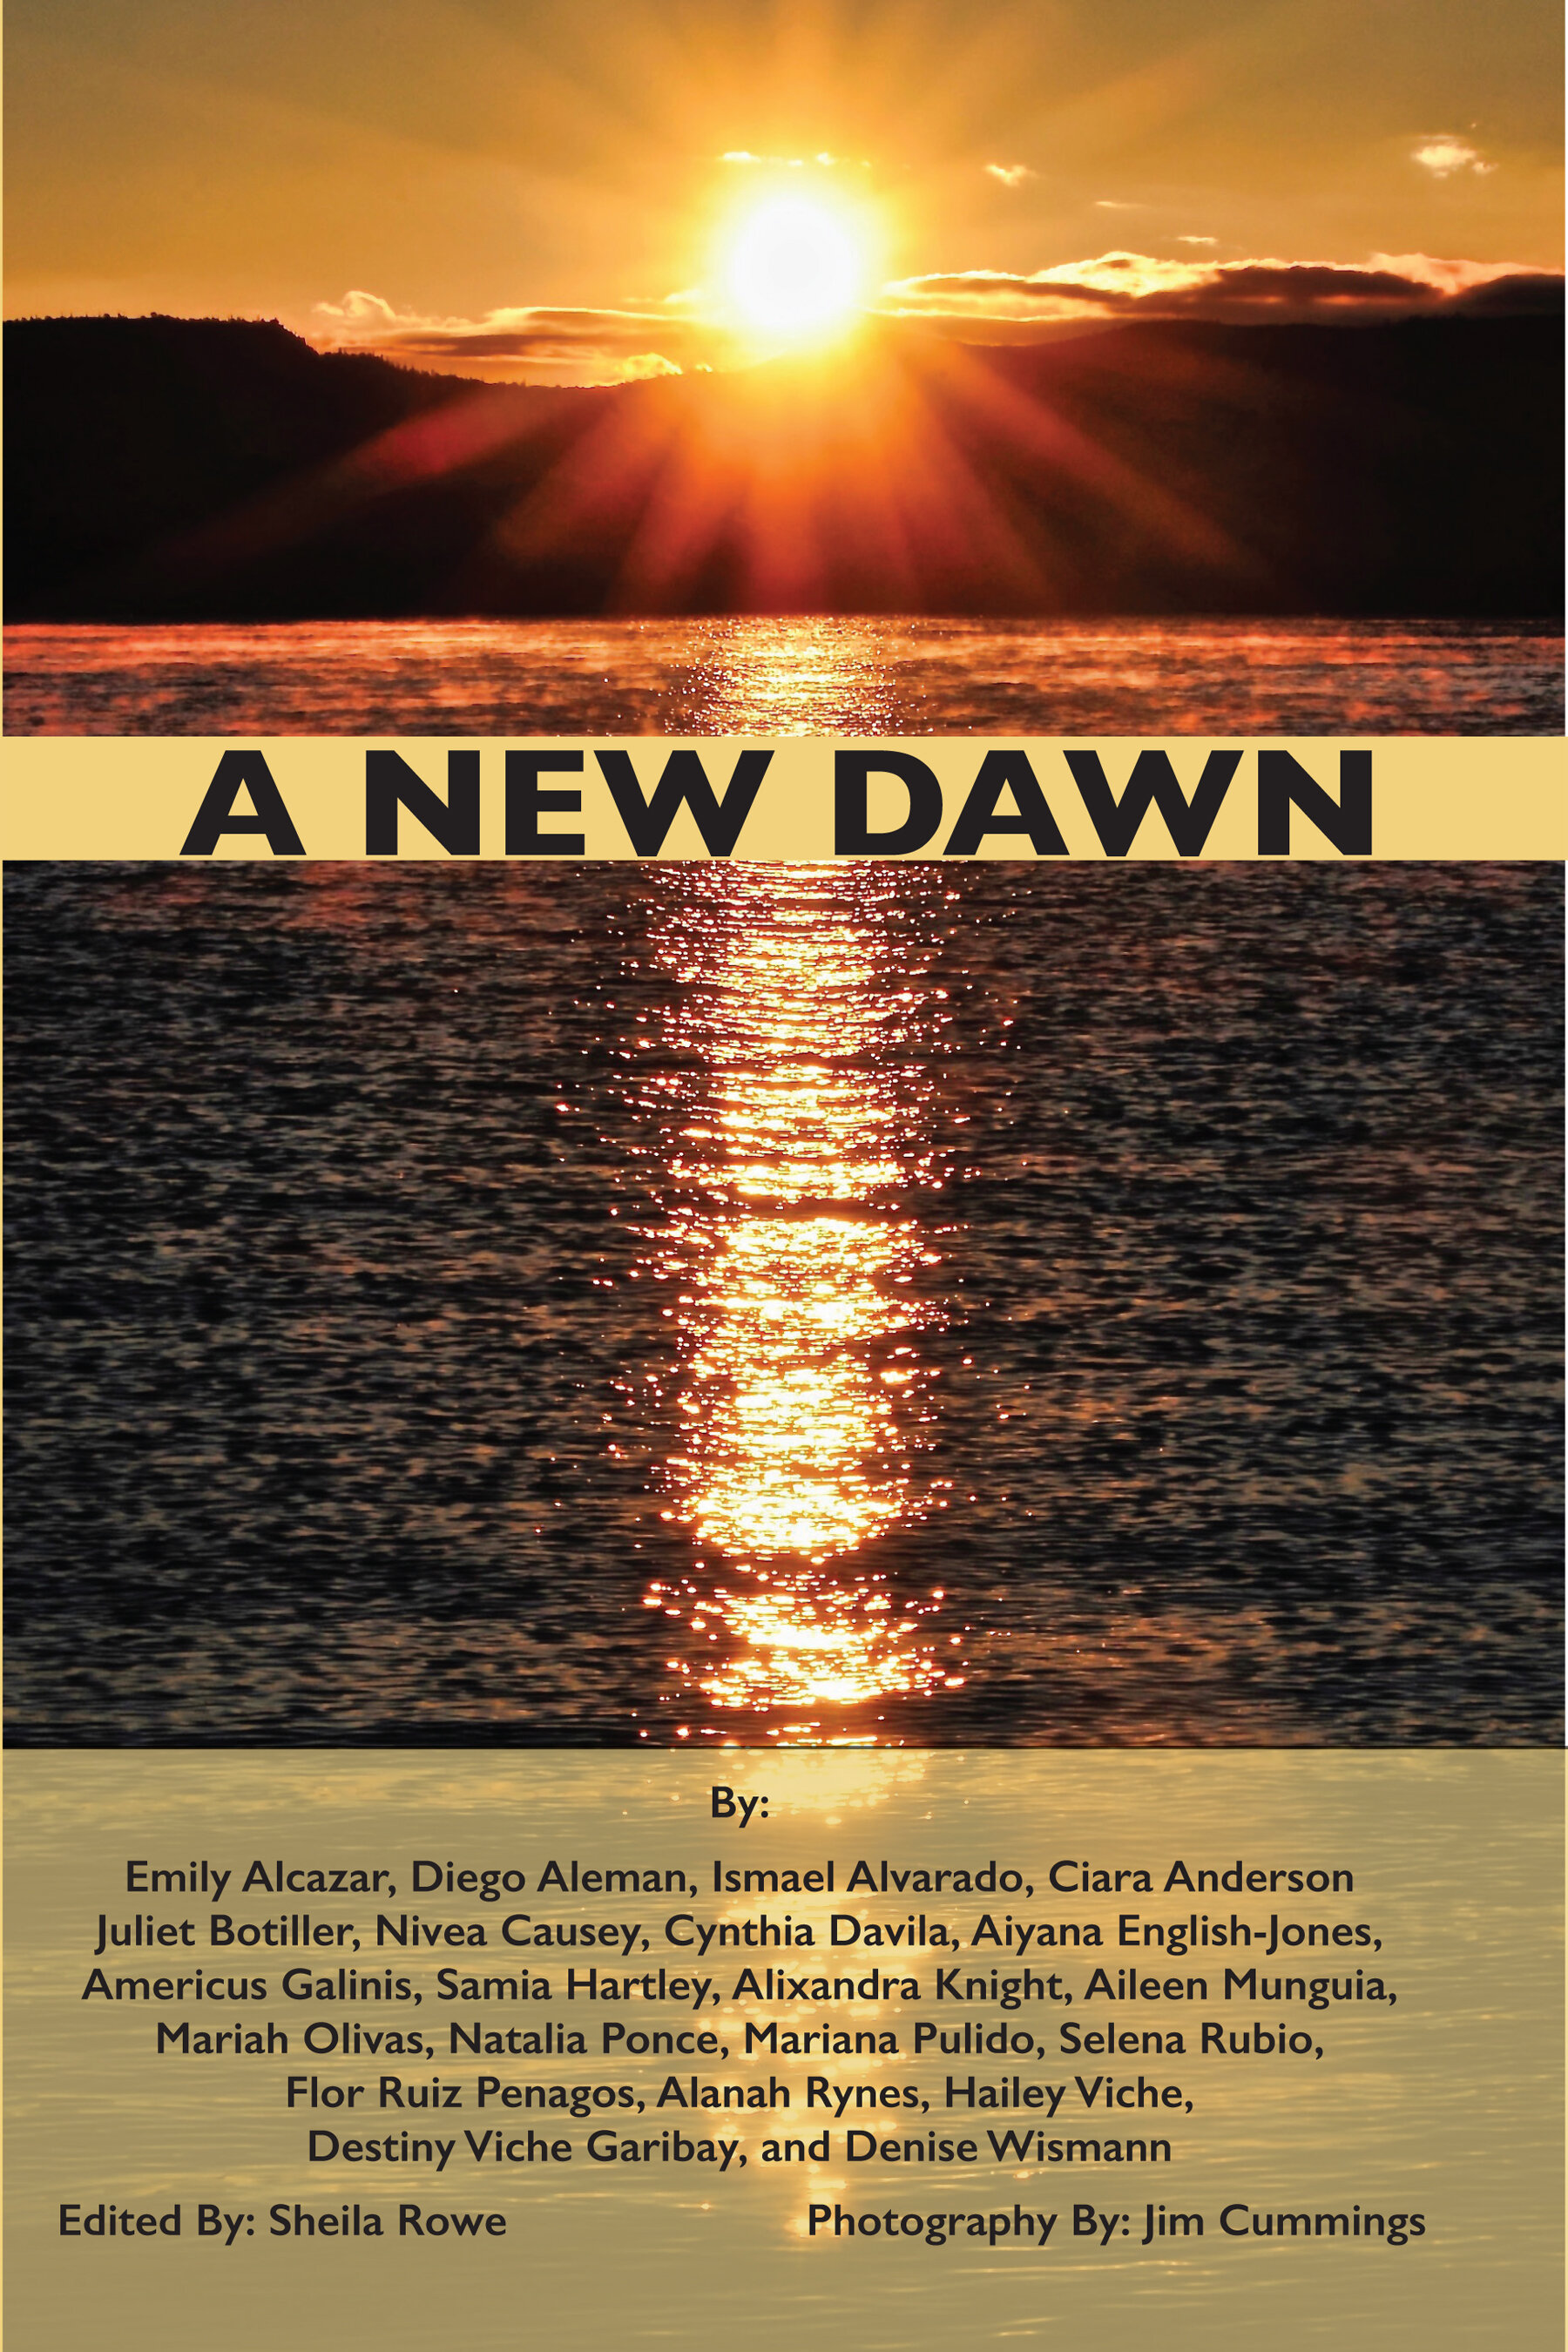 A New Dawn Cover version 2.indd